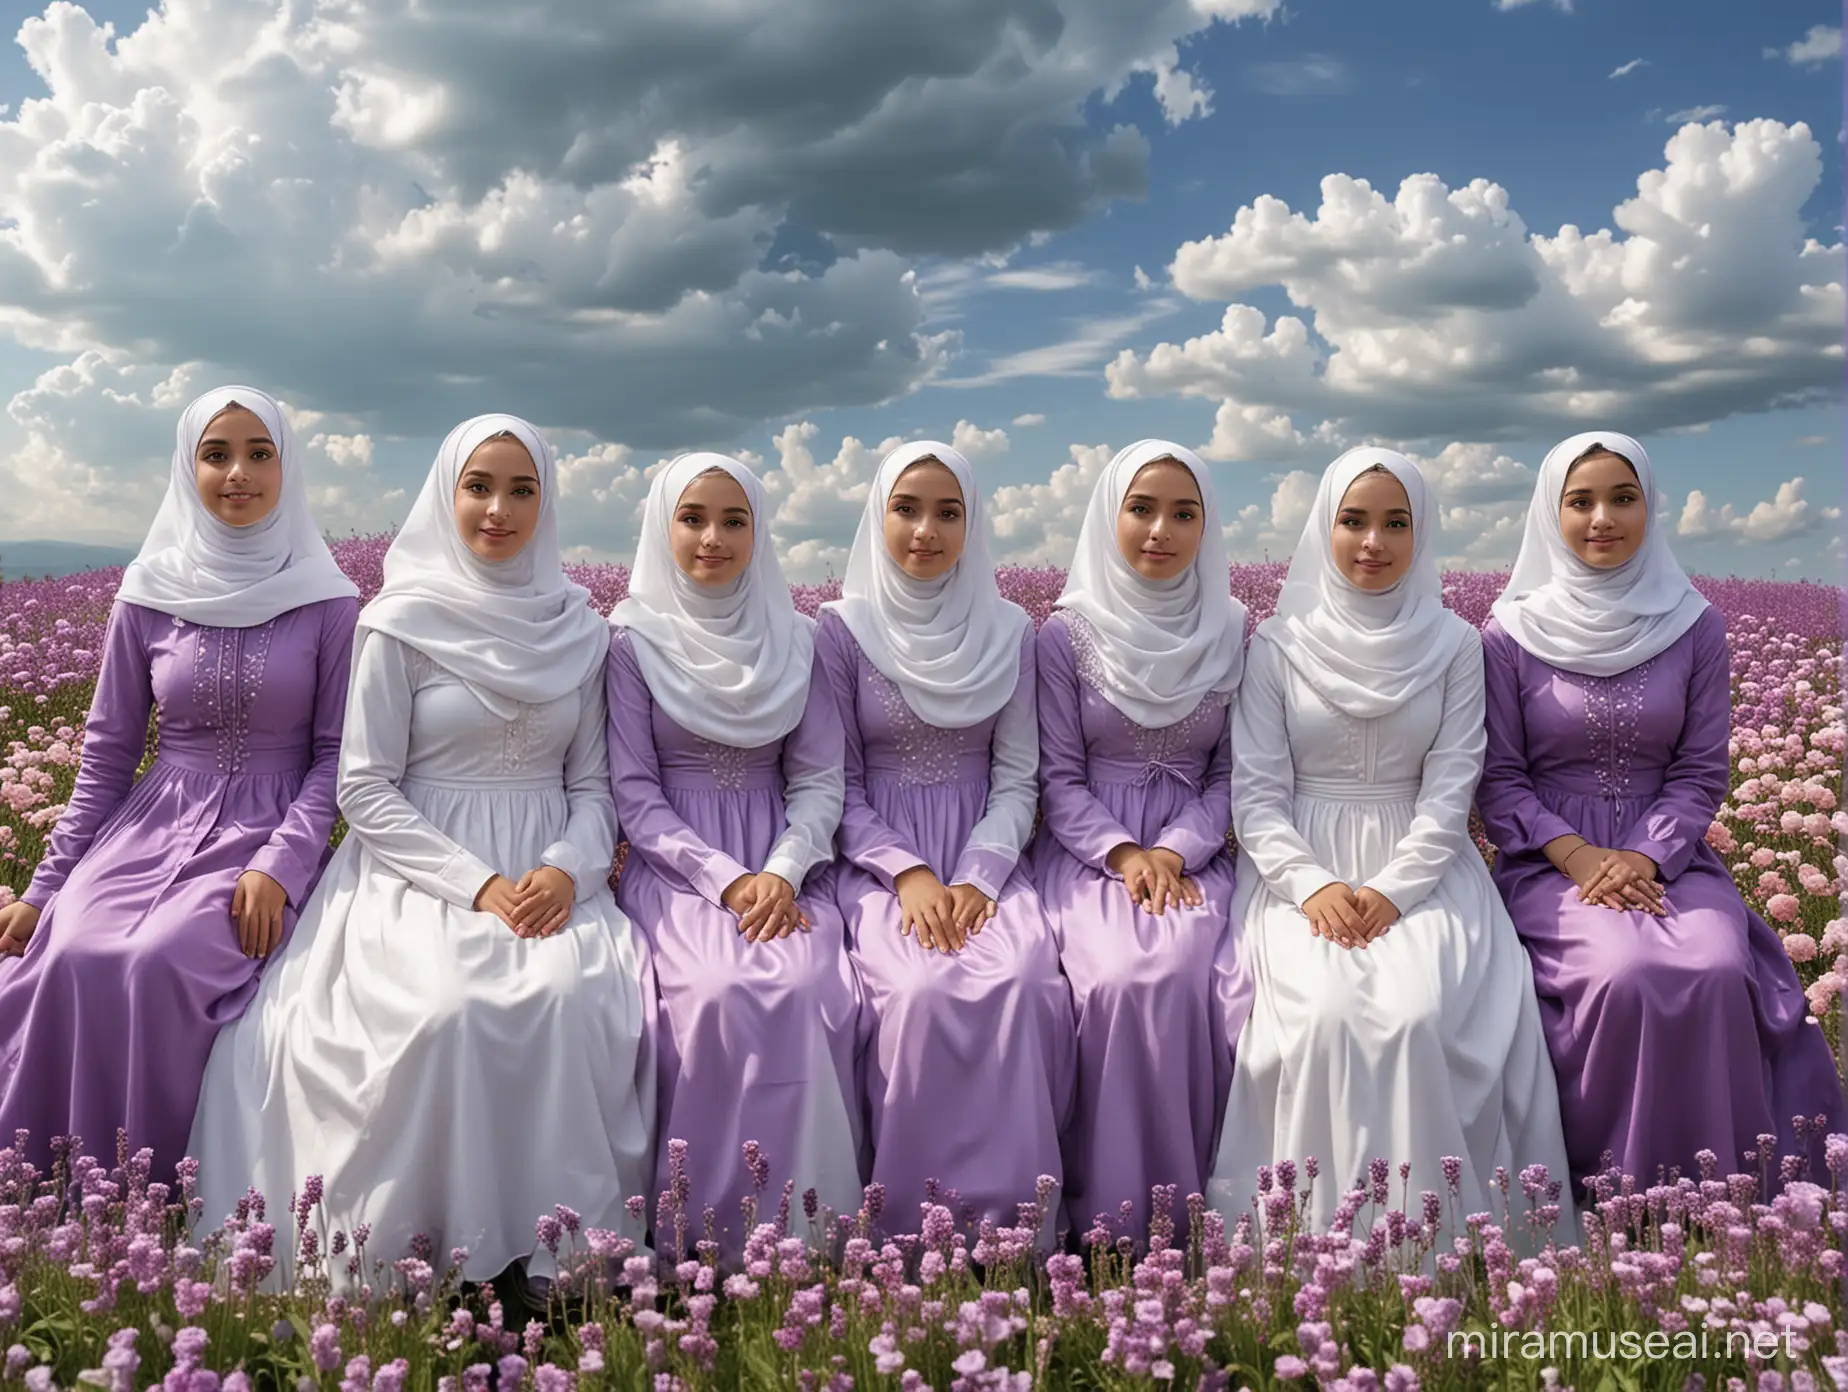 Group of Hijabi Girls in White and Purple Dresses Amidst Flower Fields